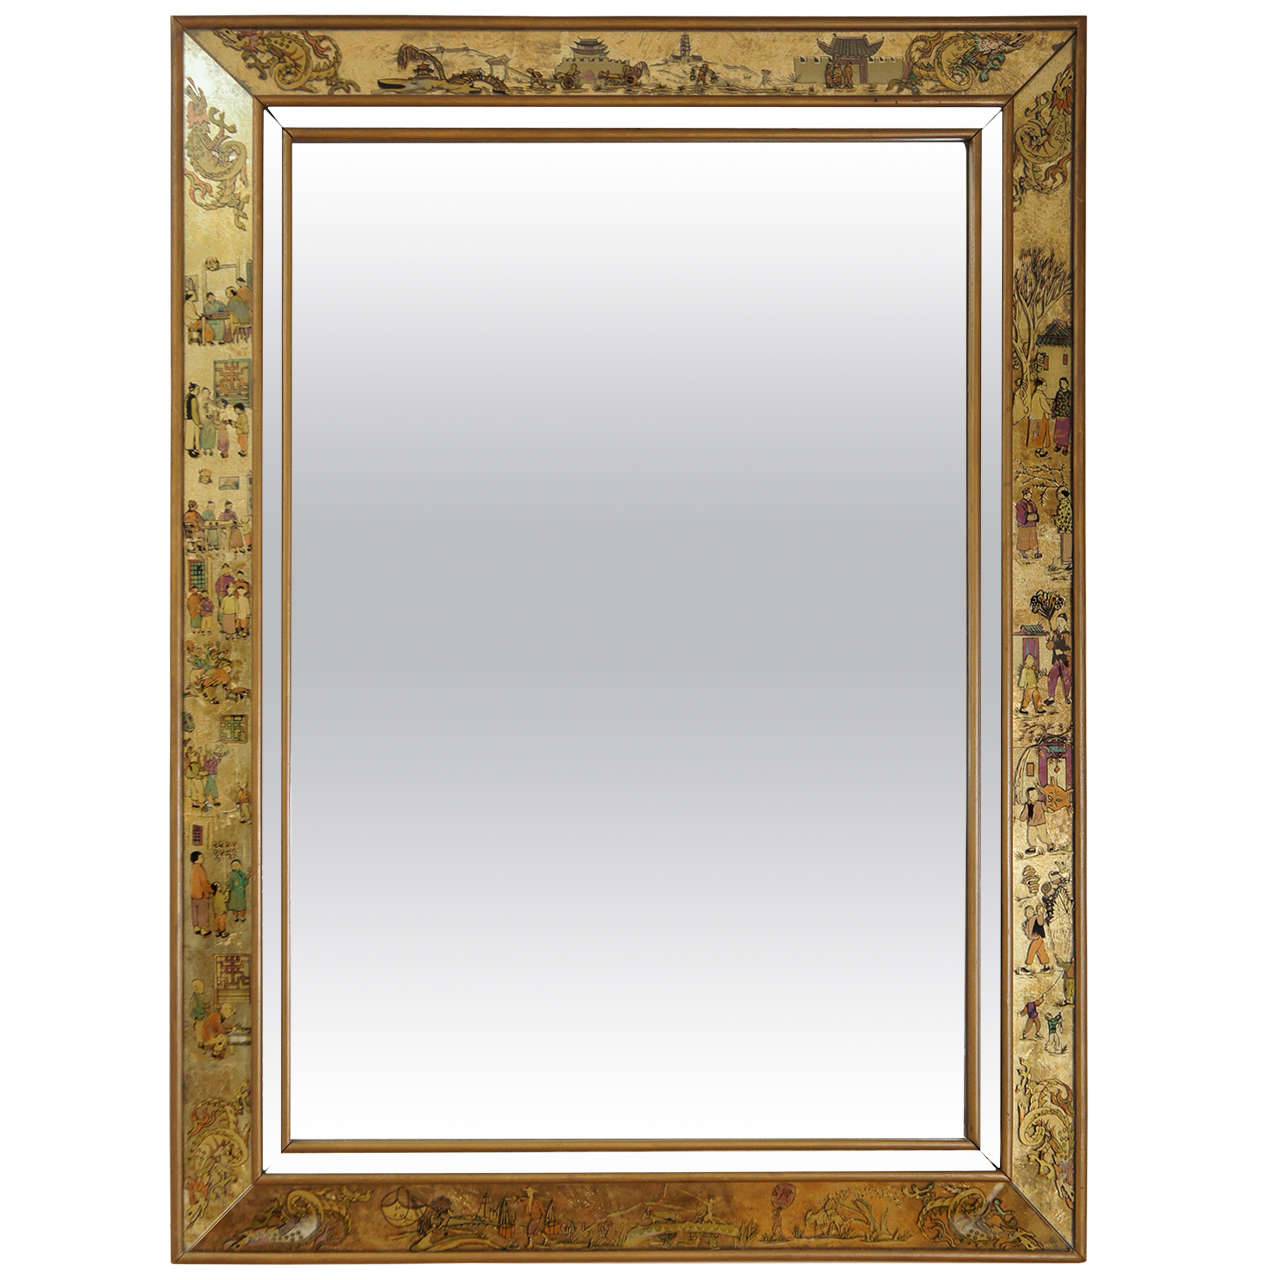 Chinese Inspired Eglomise Bordered Mirror in the Manner of Da Barge